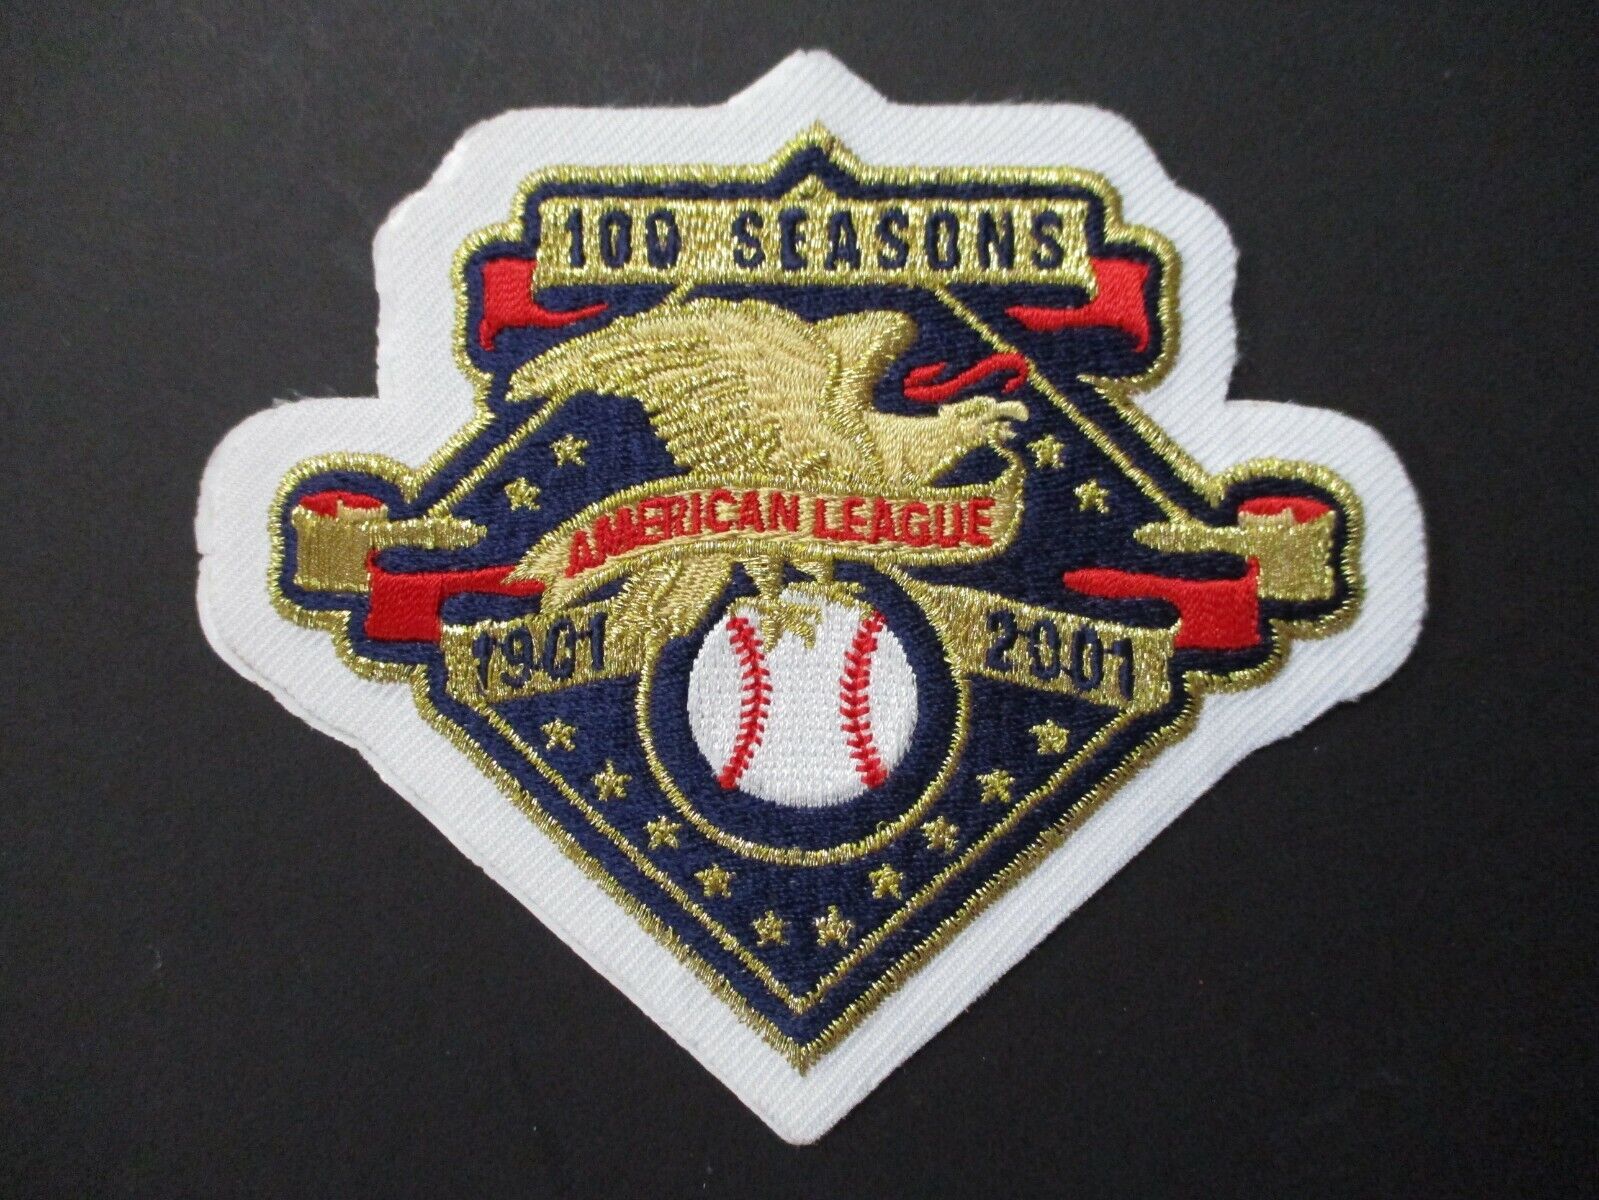 100 Season of American League Baseball Patch Size 4.25 x 4.75 inches